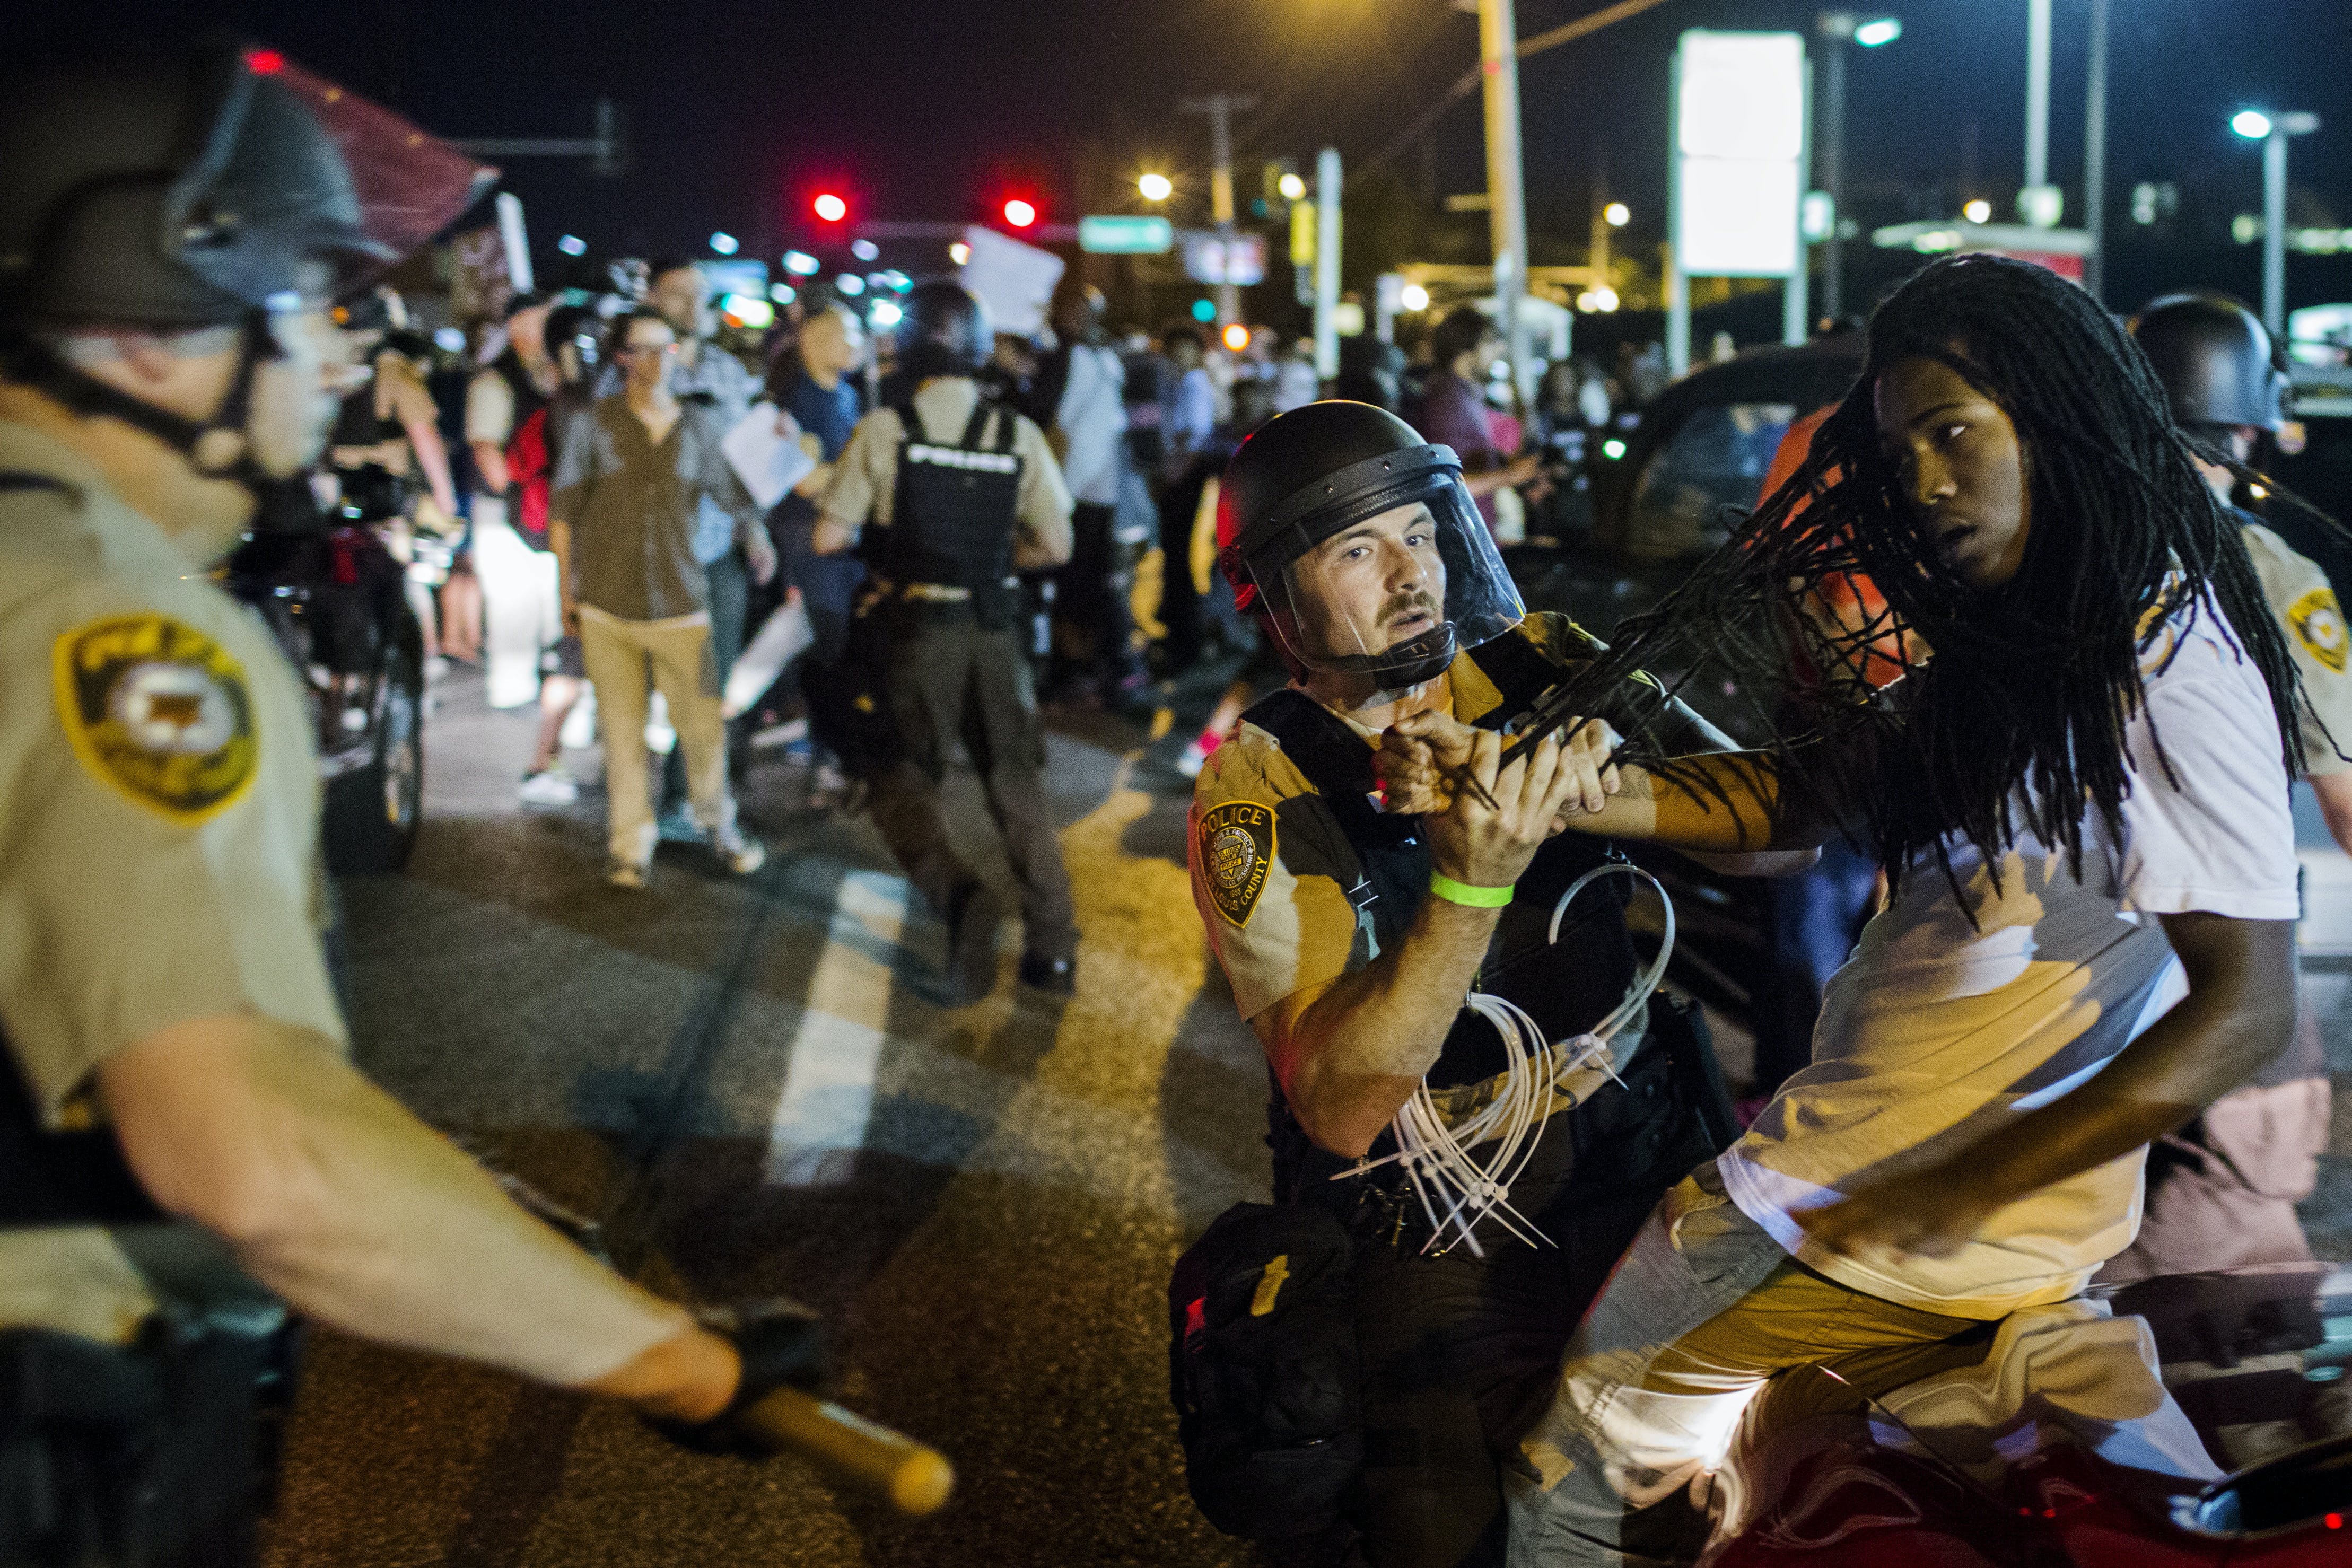 St Louis County police officers hold an anti-police demonstrator in Ferguson, Missouri